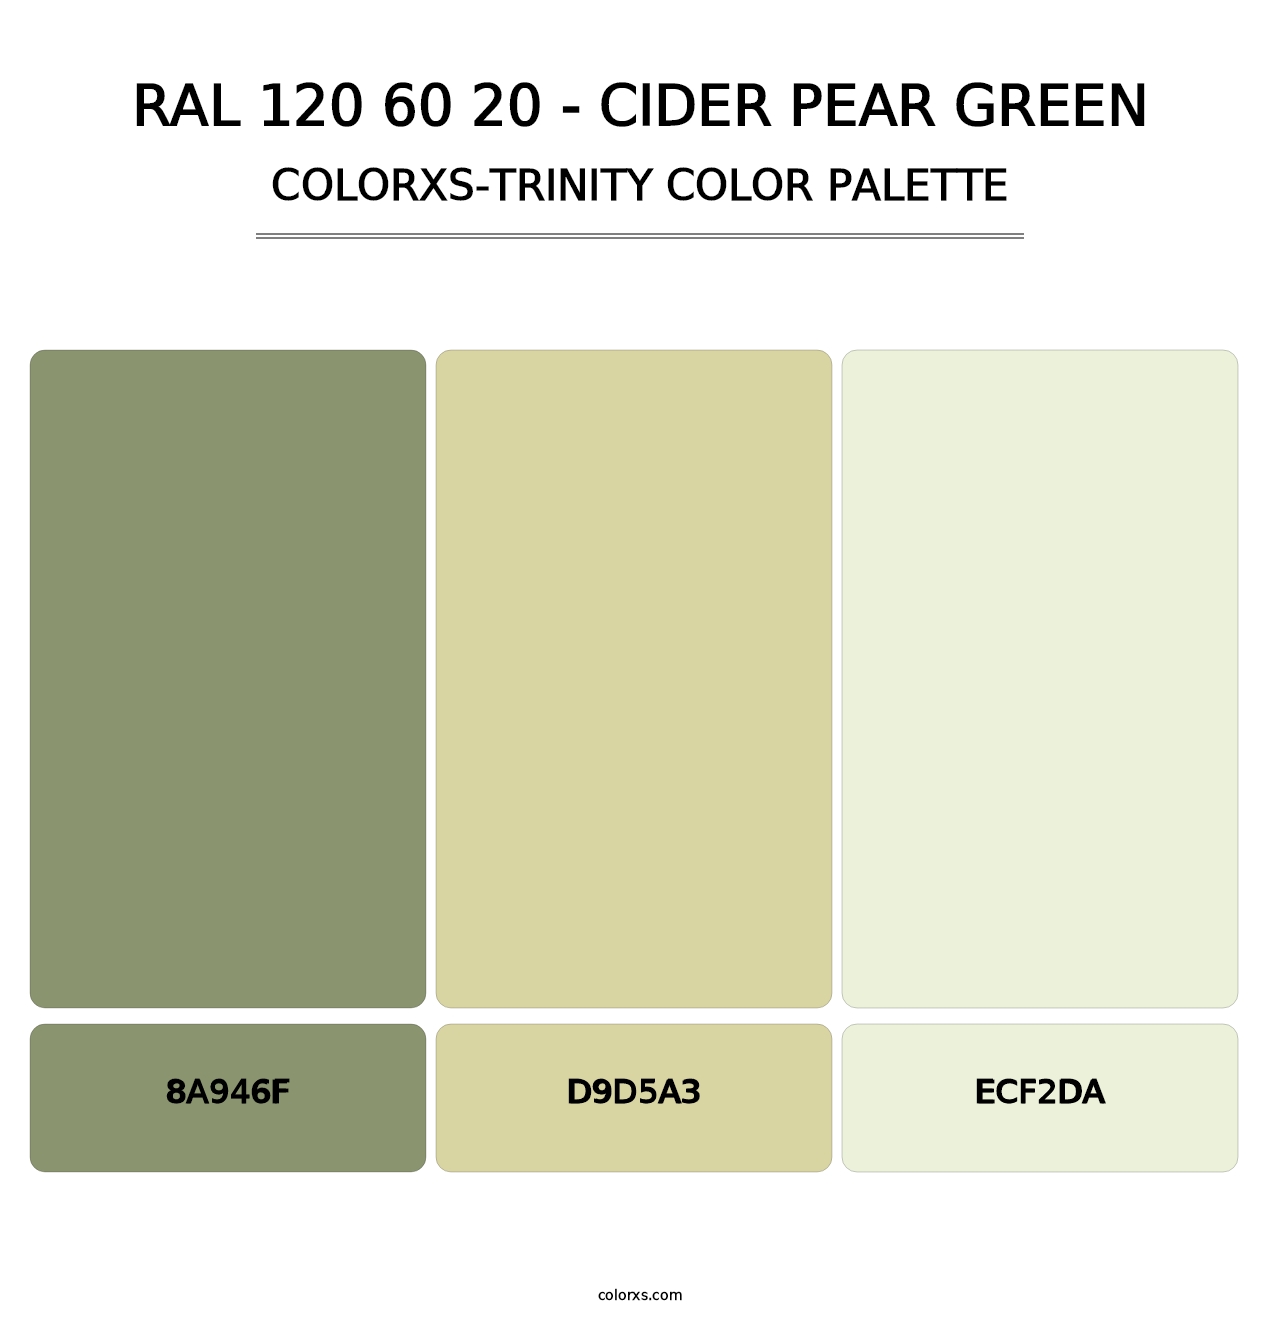 RAL 120 60 20 - Cider Pear Green - Colorxs Trinity Palette